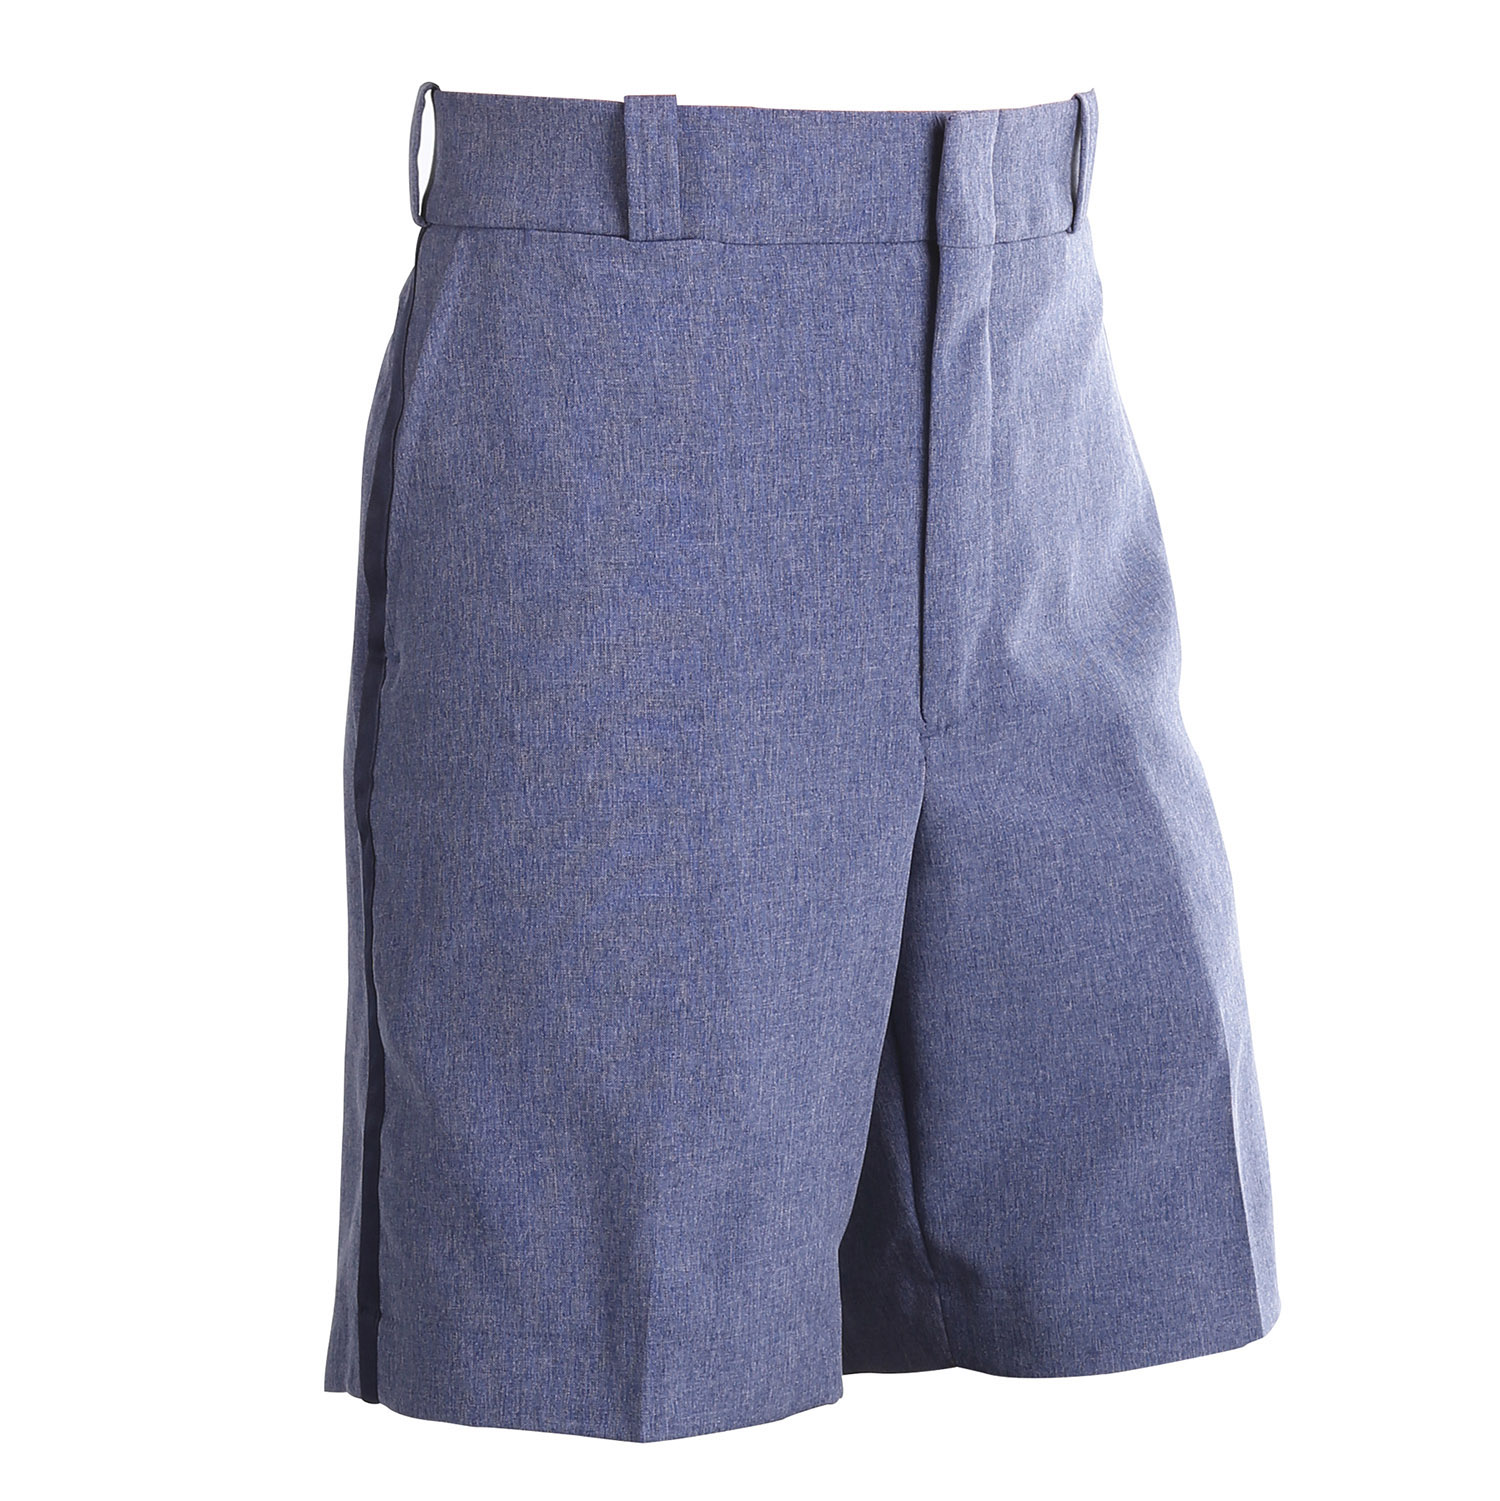 MENS RELAXED FIT WALK SHORTS